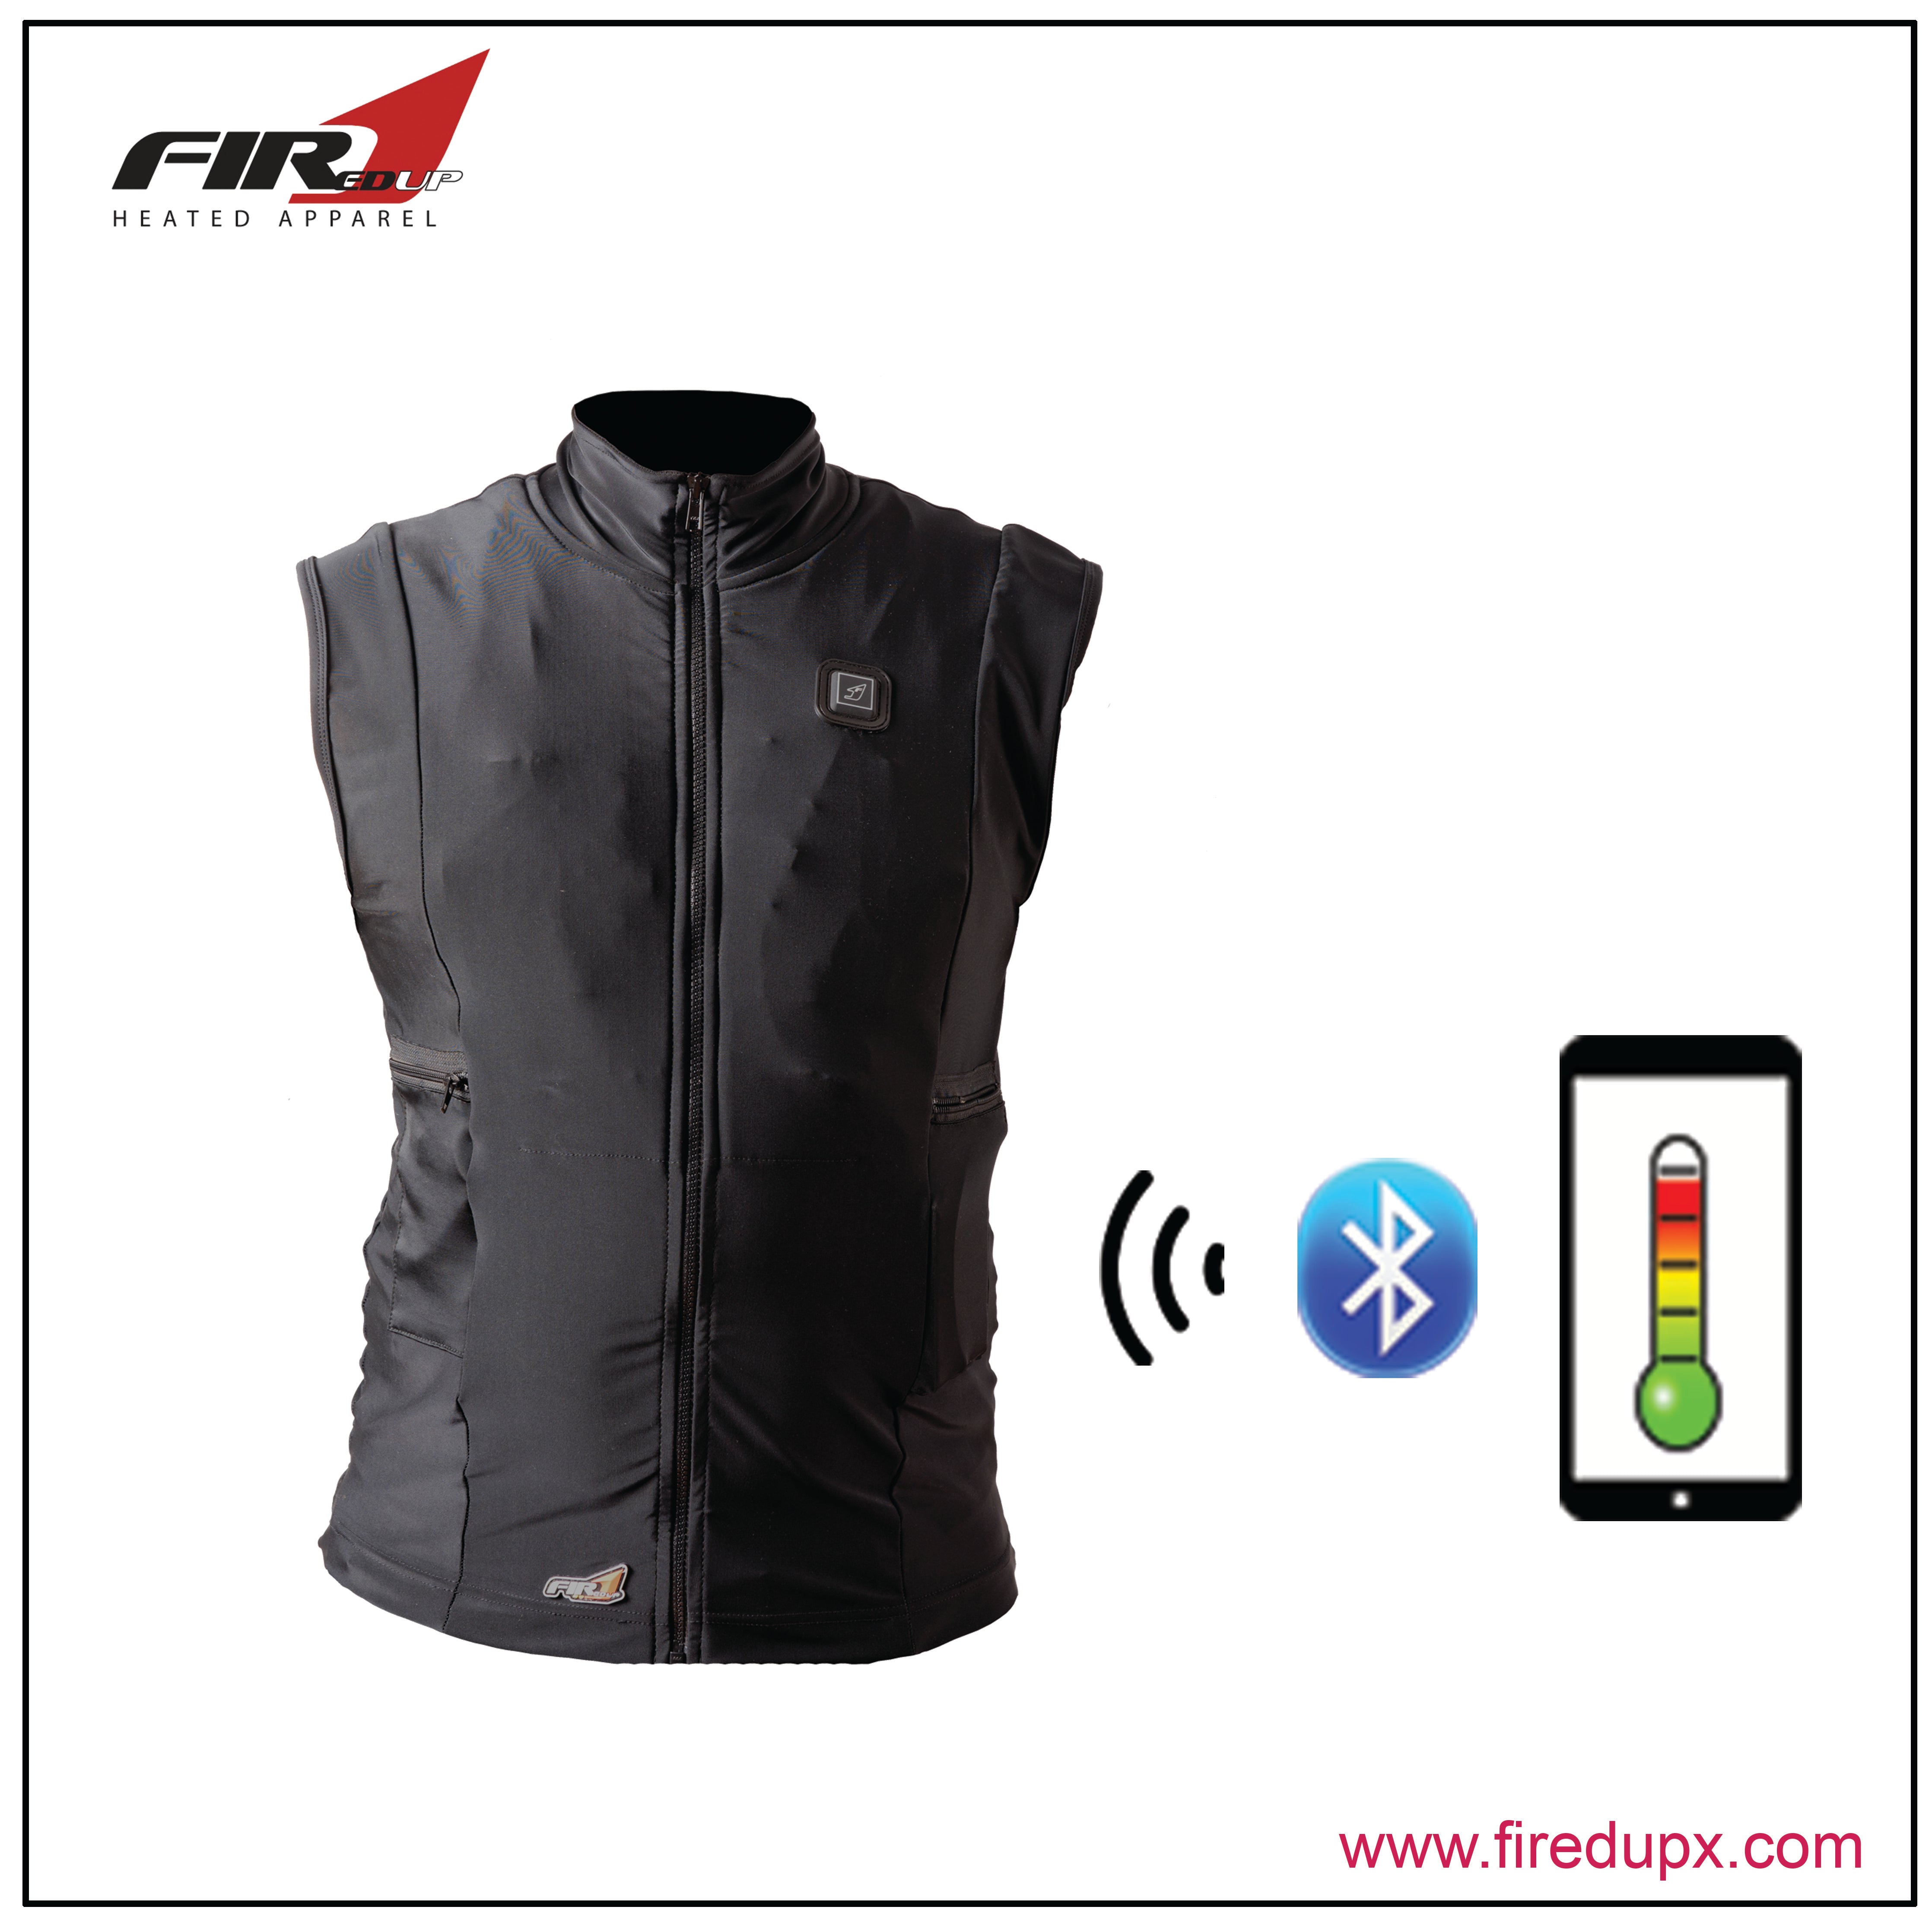 Unisex Infrared Vest Liner with Temperature Control Application